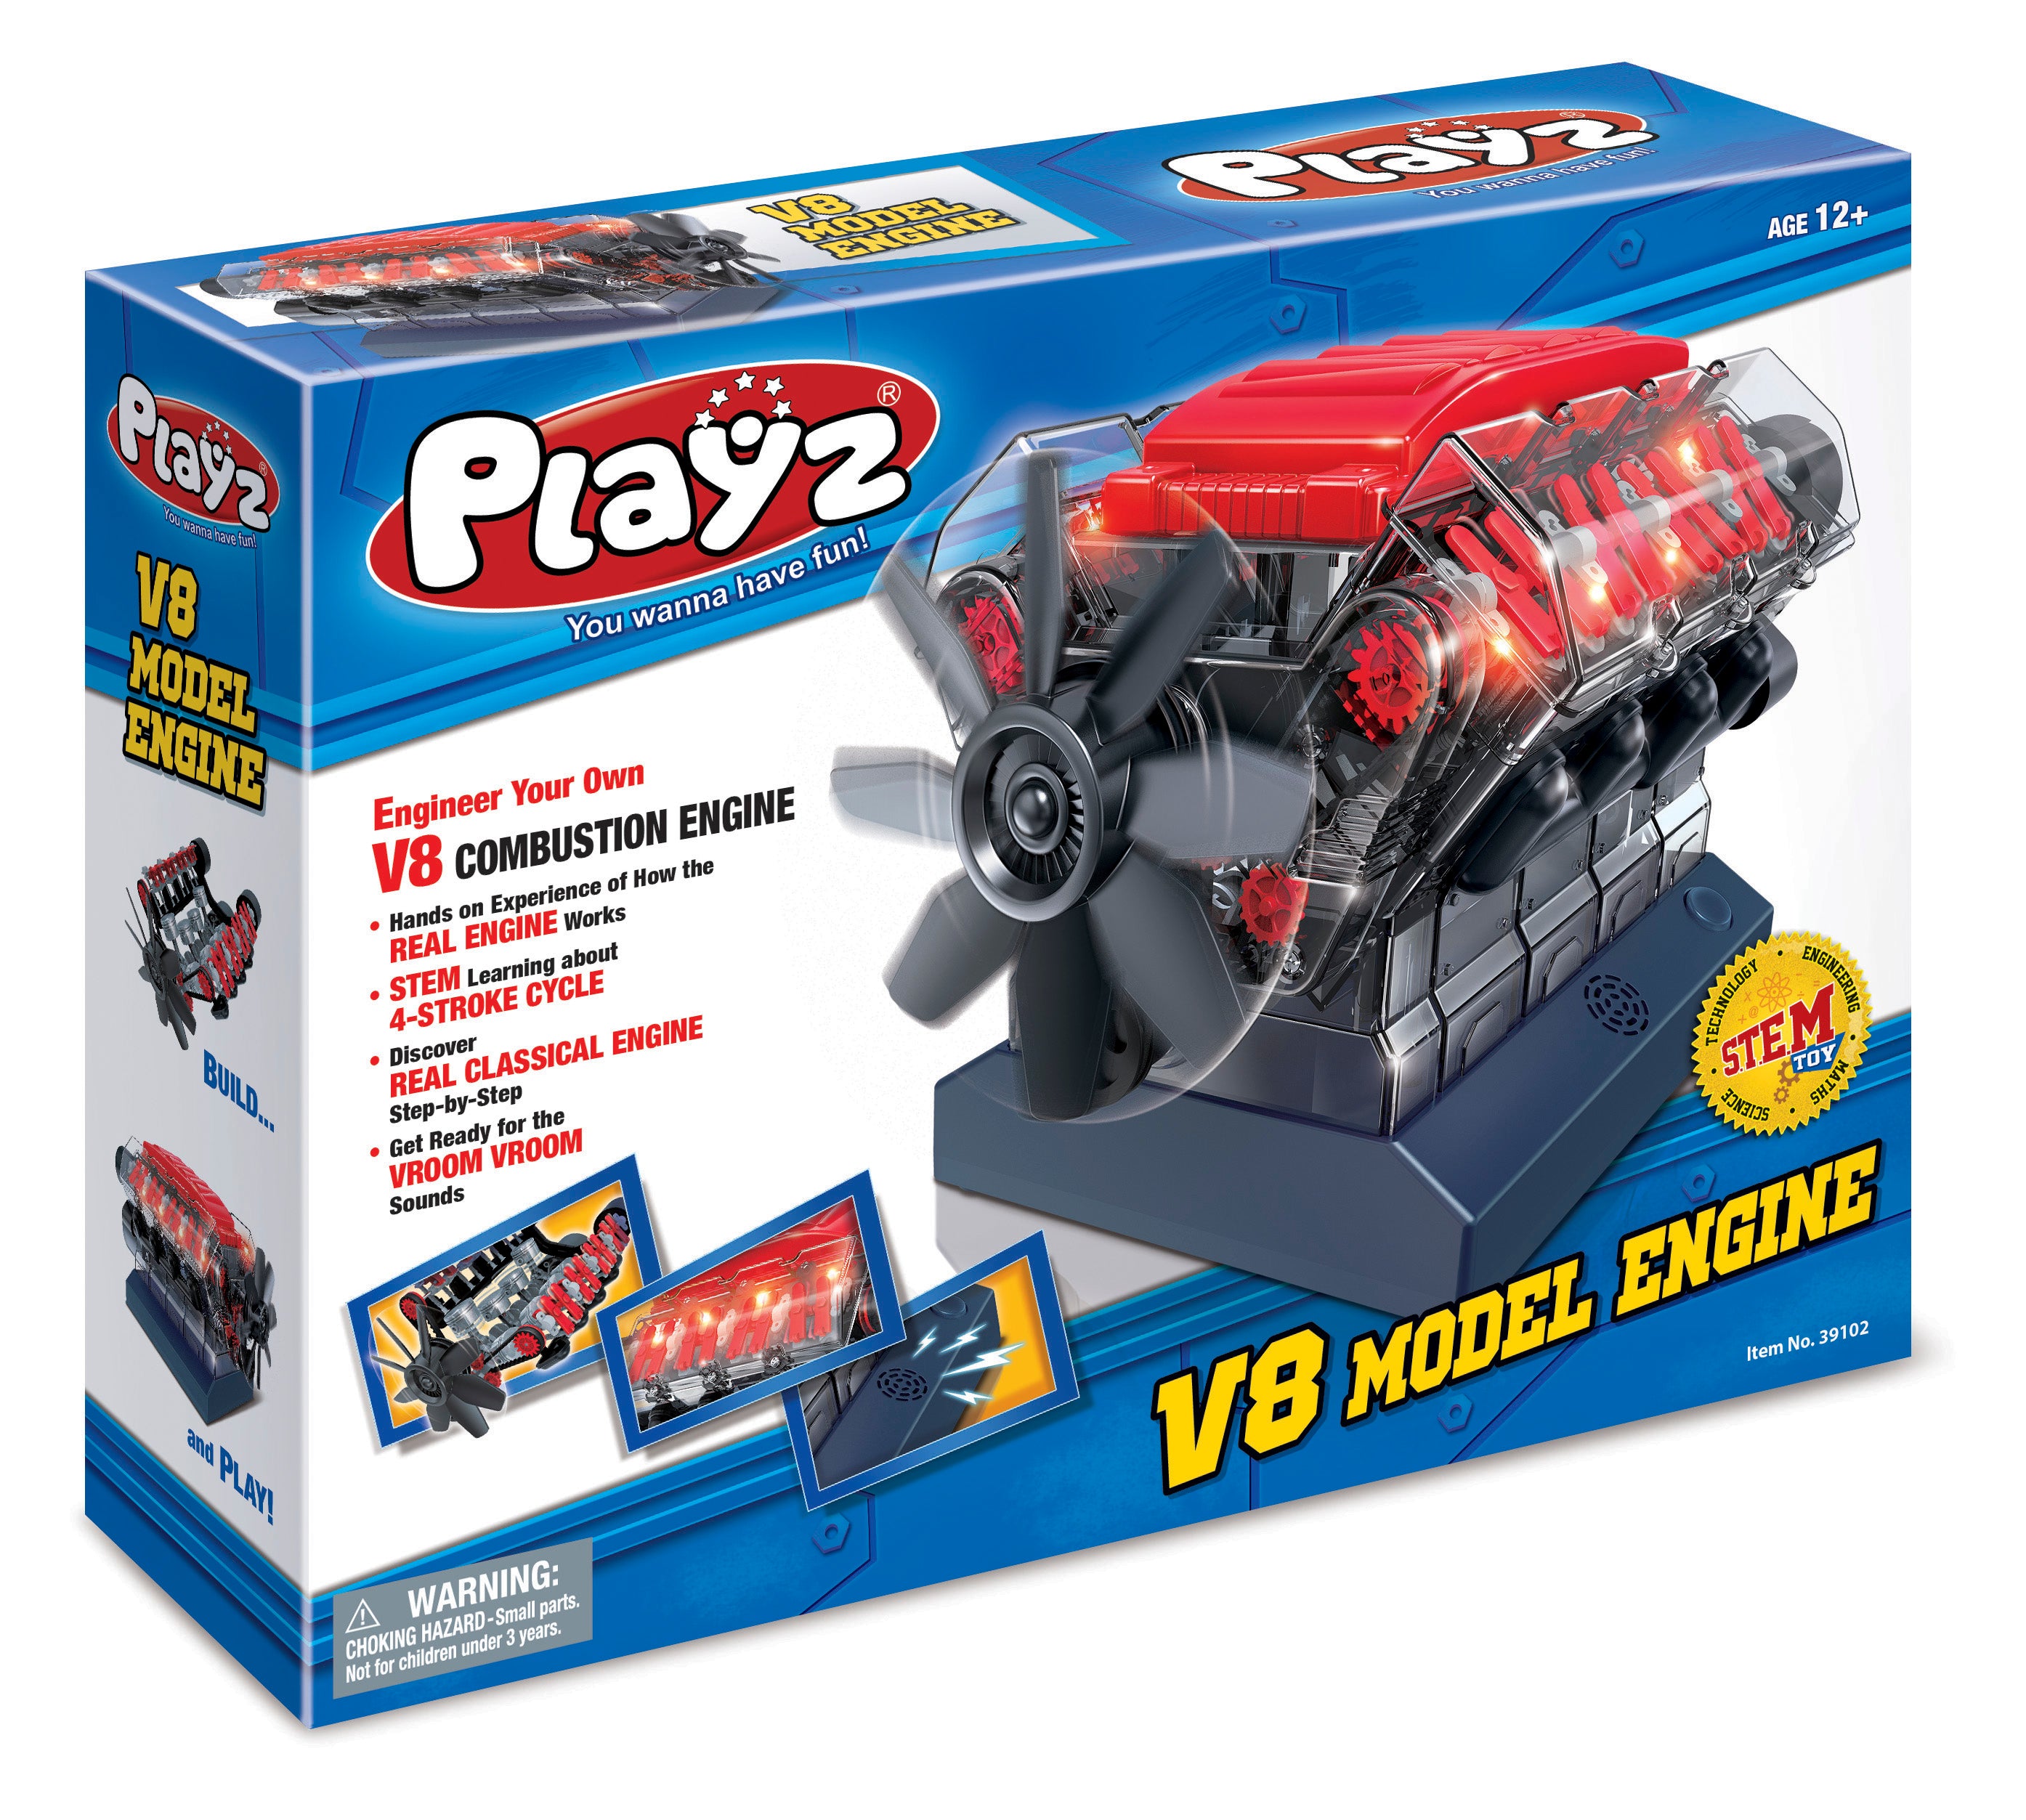 Playz V8 Combustion Engine Model Building Kit for Kids, Adults - STEM Hobby  Toy, Educational Engineering & Science Kit for Aspiring Engineers Ages 12+  w/ DIY Guide & Realistic Mini Parts That